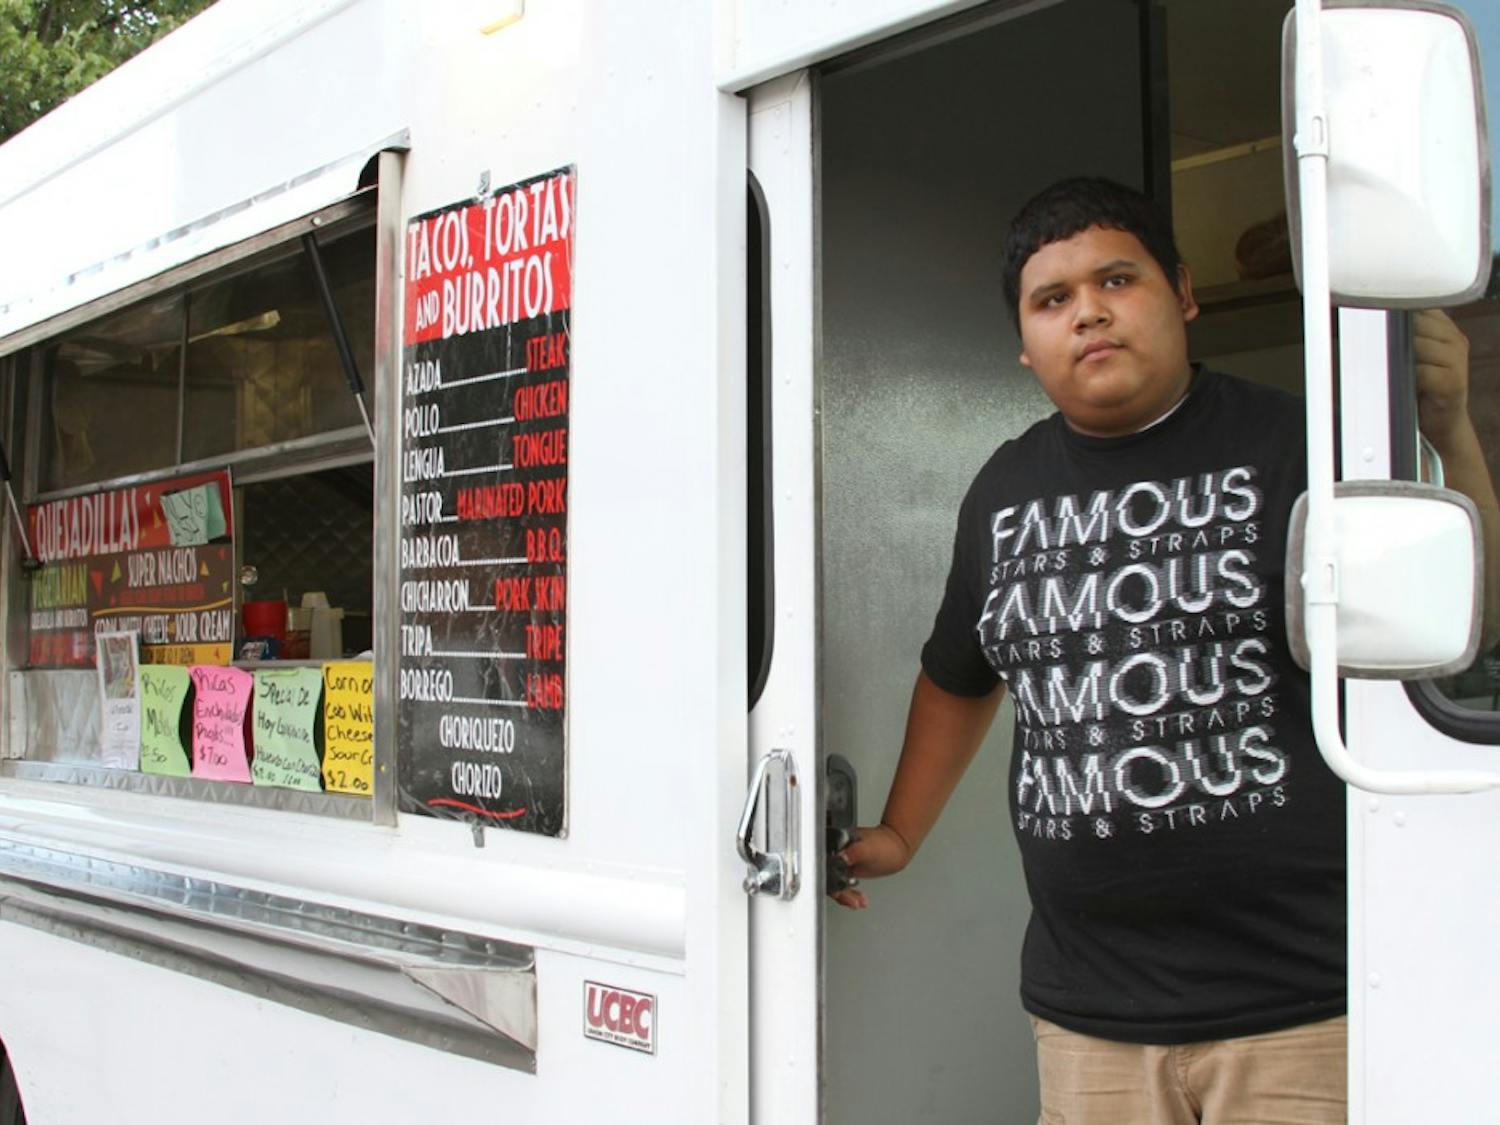 Roberto Garcia, 17, of Burlington works at the Taqueria Del Jalisco food truck located at 206 E. Main Street. The truck is open from 6pm-1am Tuesday to Saturday for late-night taco cravings.